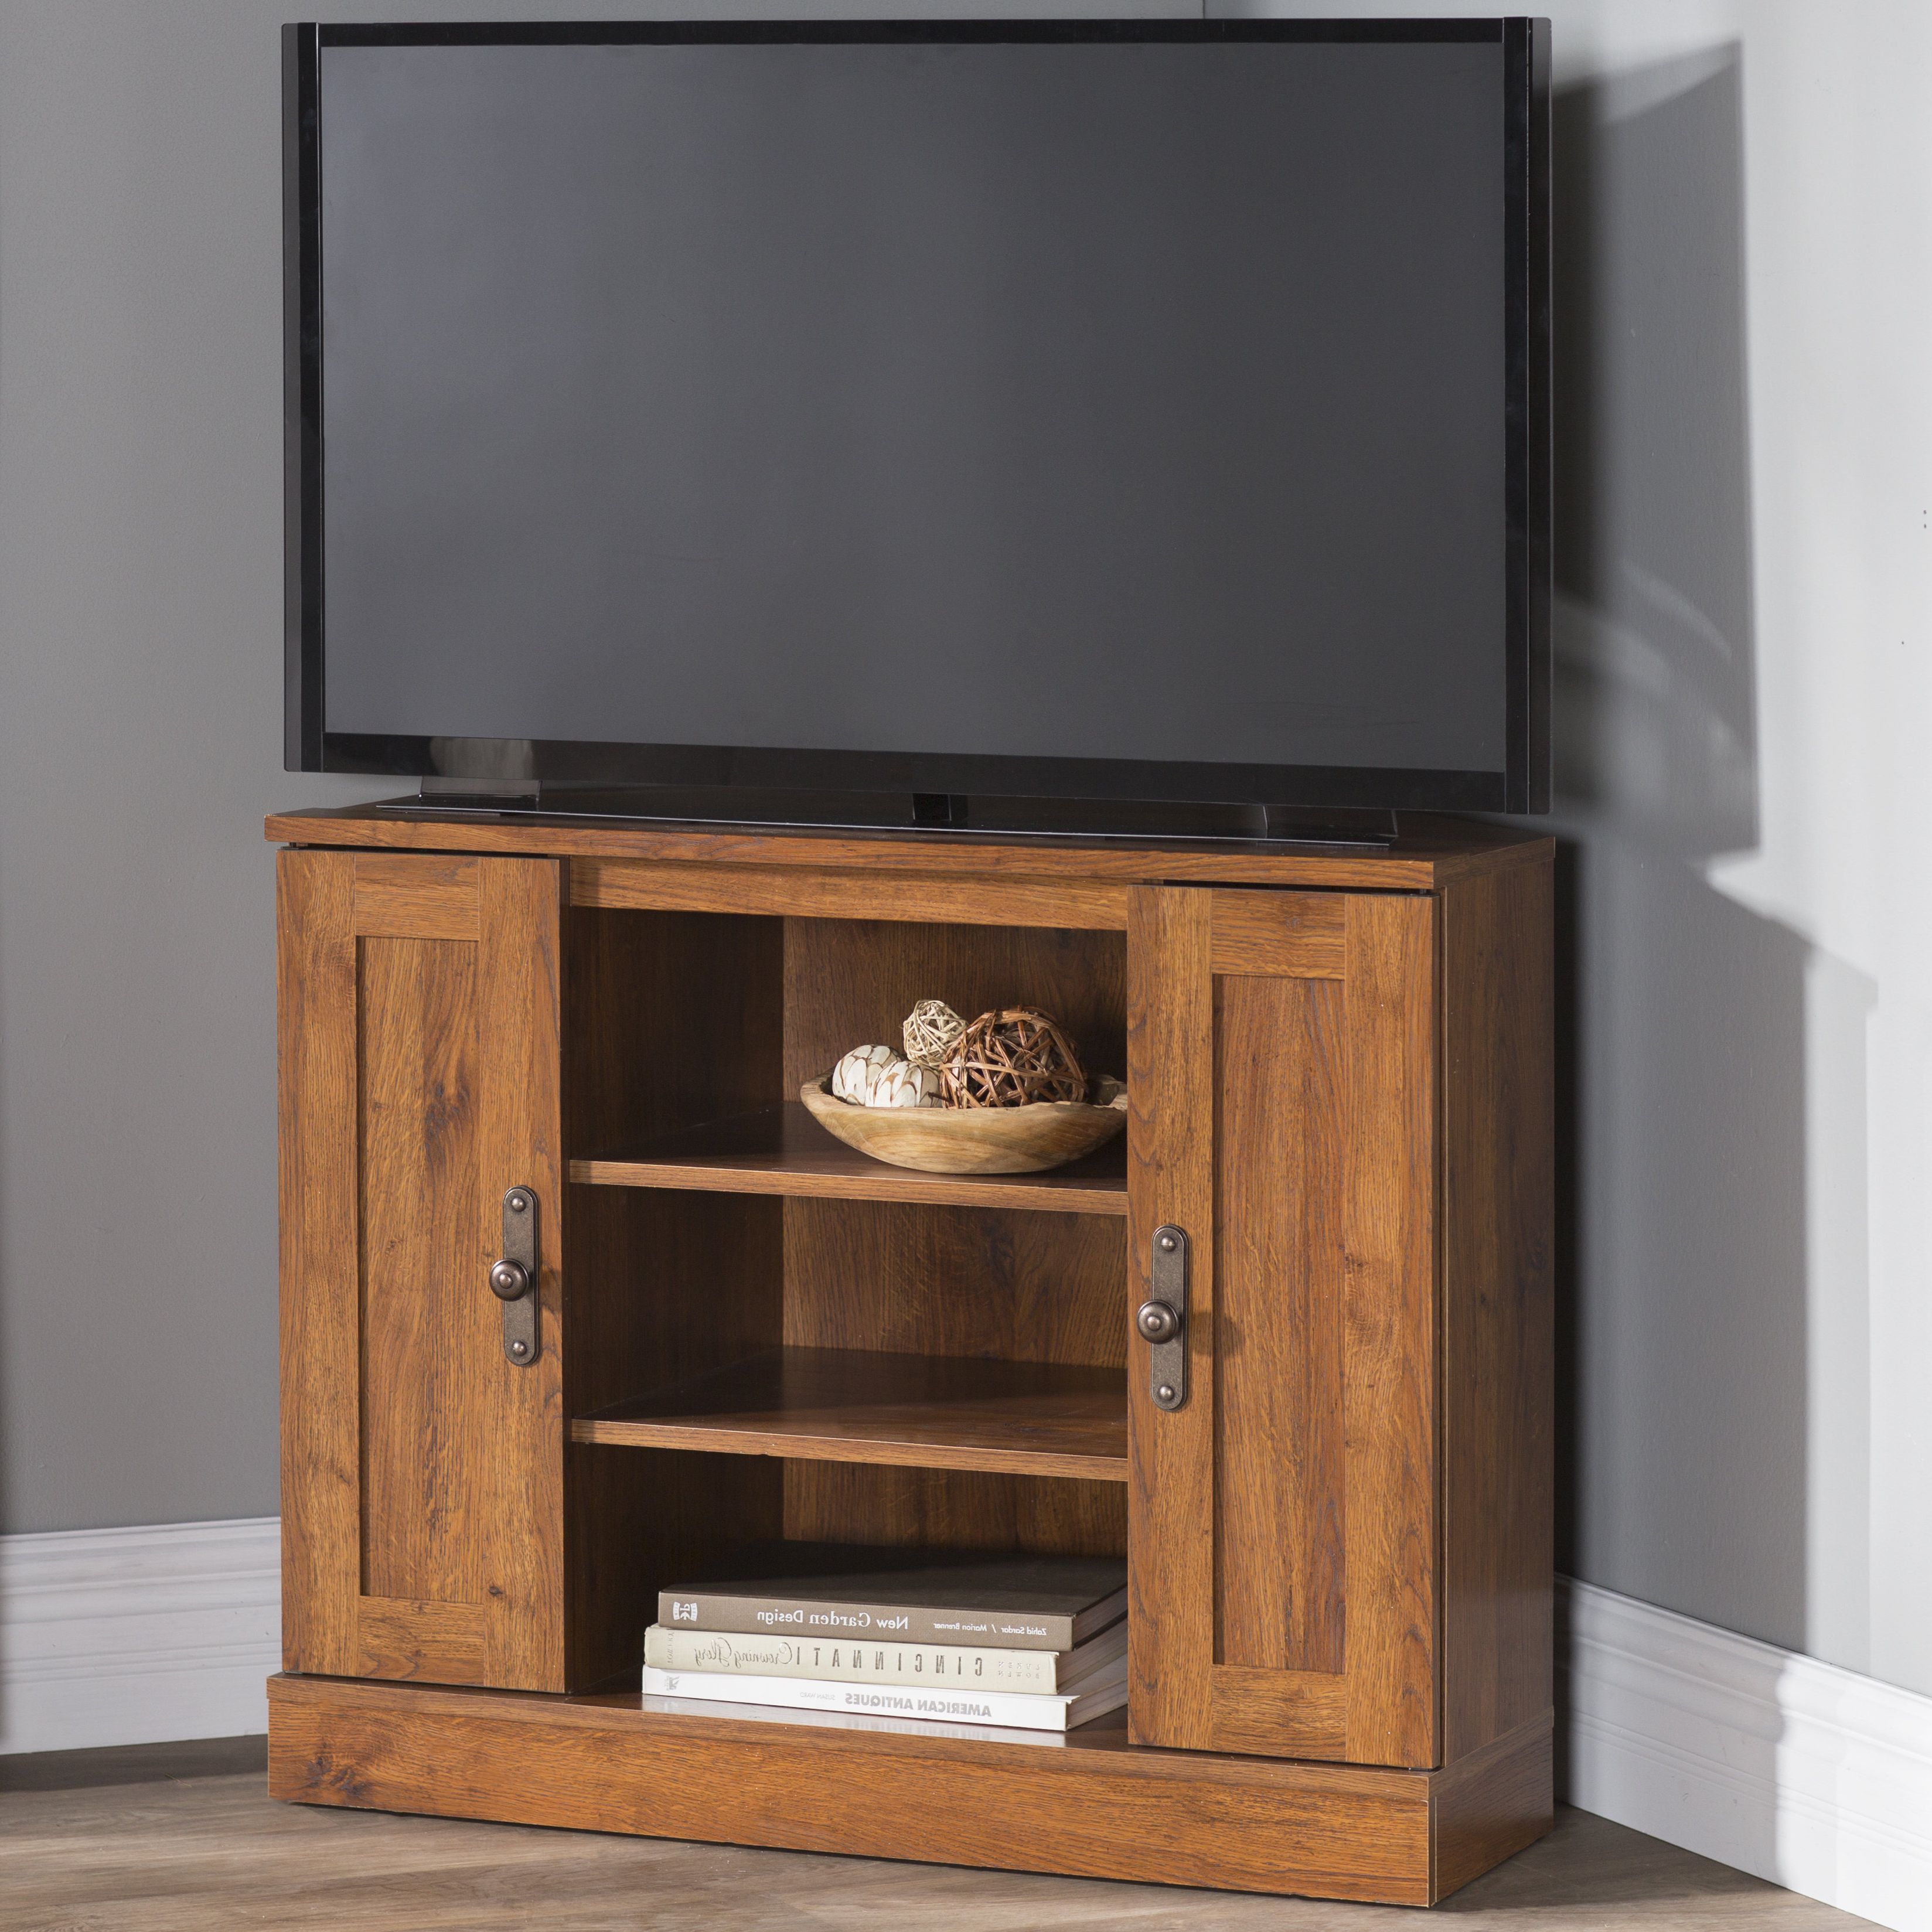 Compact Corner Tv Stands Intended For Current Corner Tv Stands You'll Love (View 2 of 20)